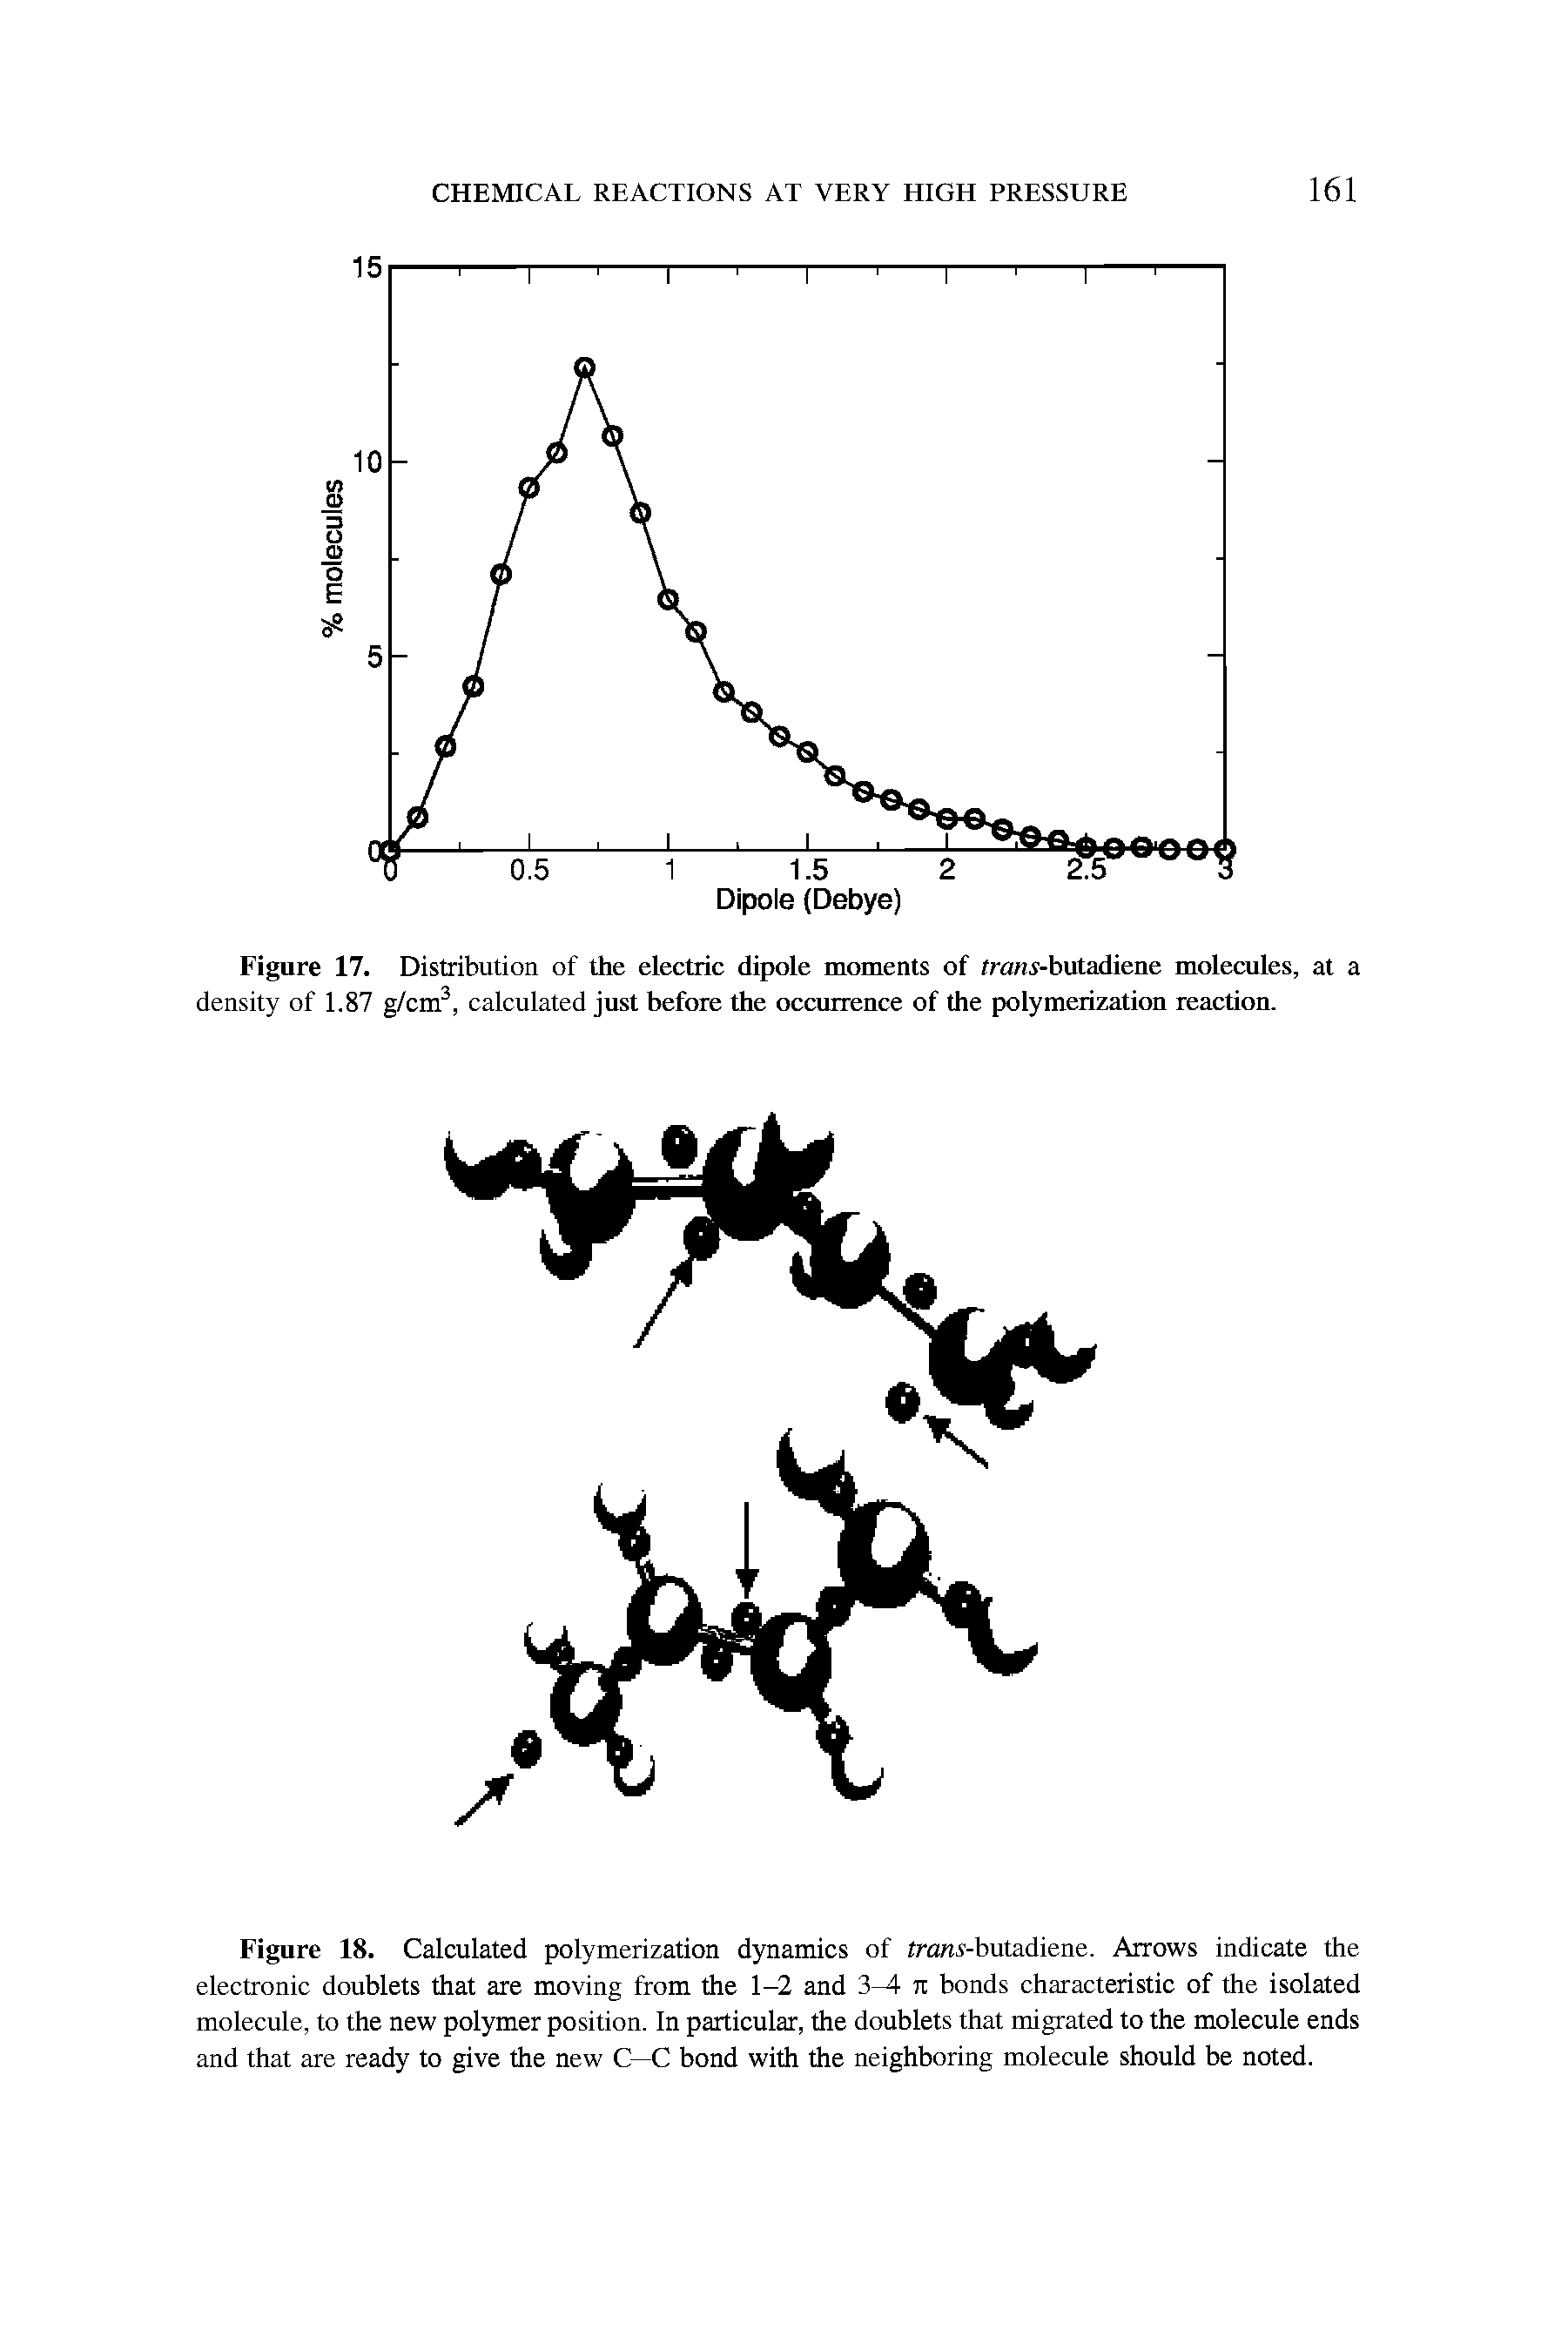 Figure 17. Distribution of the electric dipole moments of trani-butadiene molecules, at a density of 1.87 g/cm, calculated just before the occurrence of the polymerization reaction.